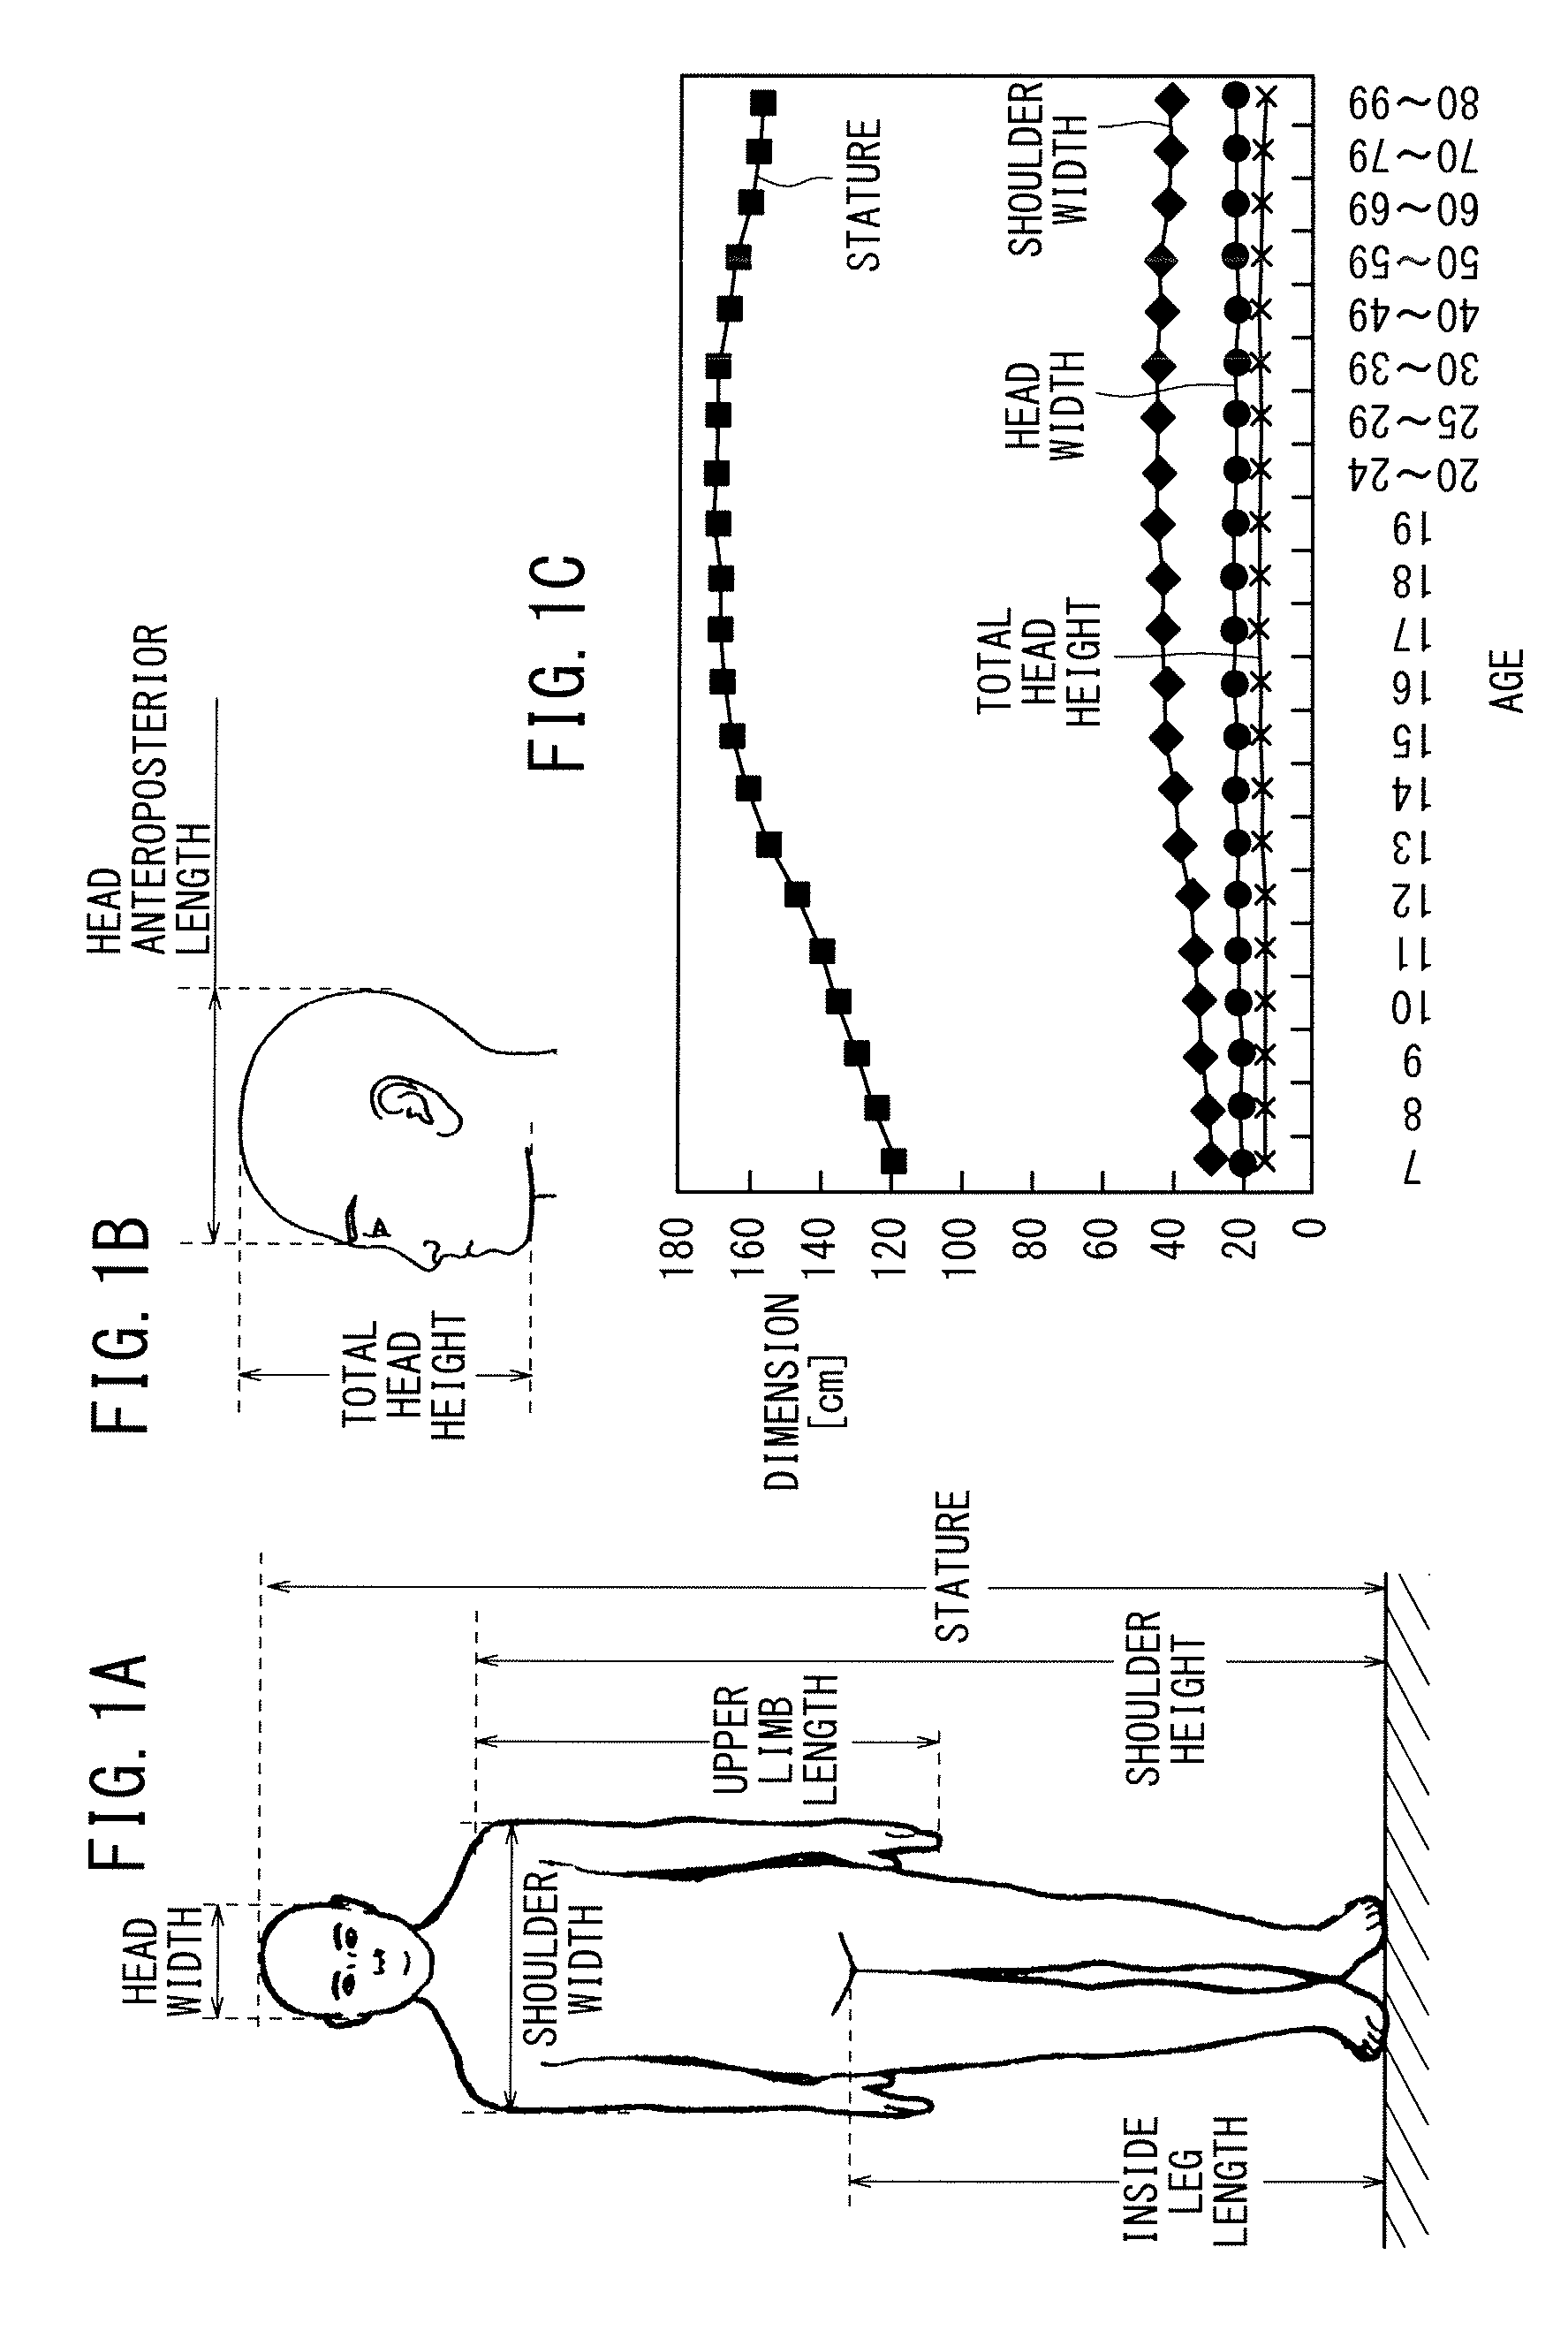 Target-object distance measuring device and vehicle mounted with the device